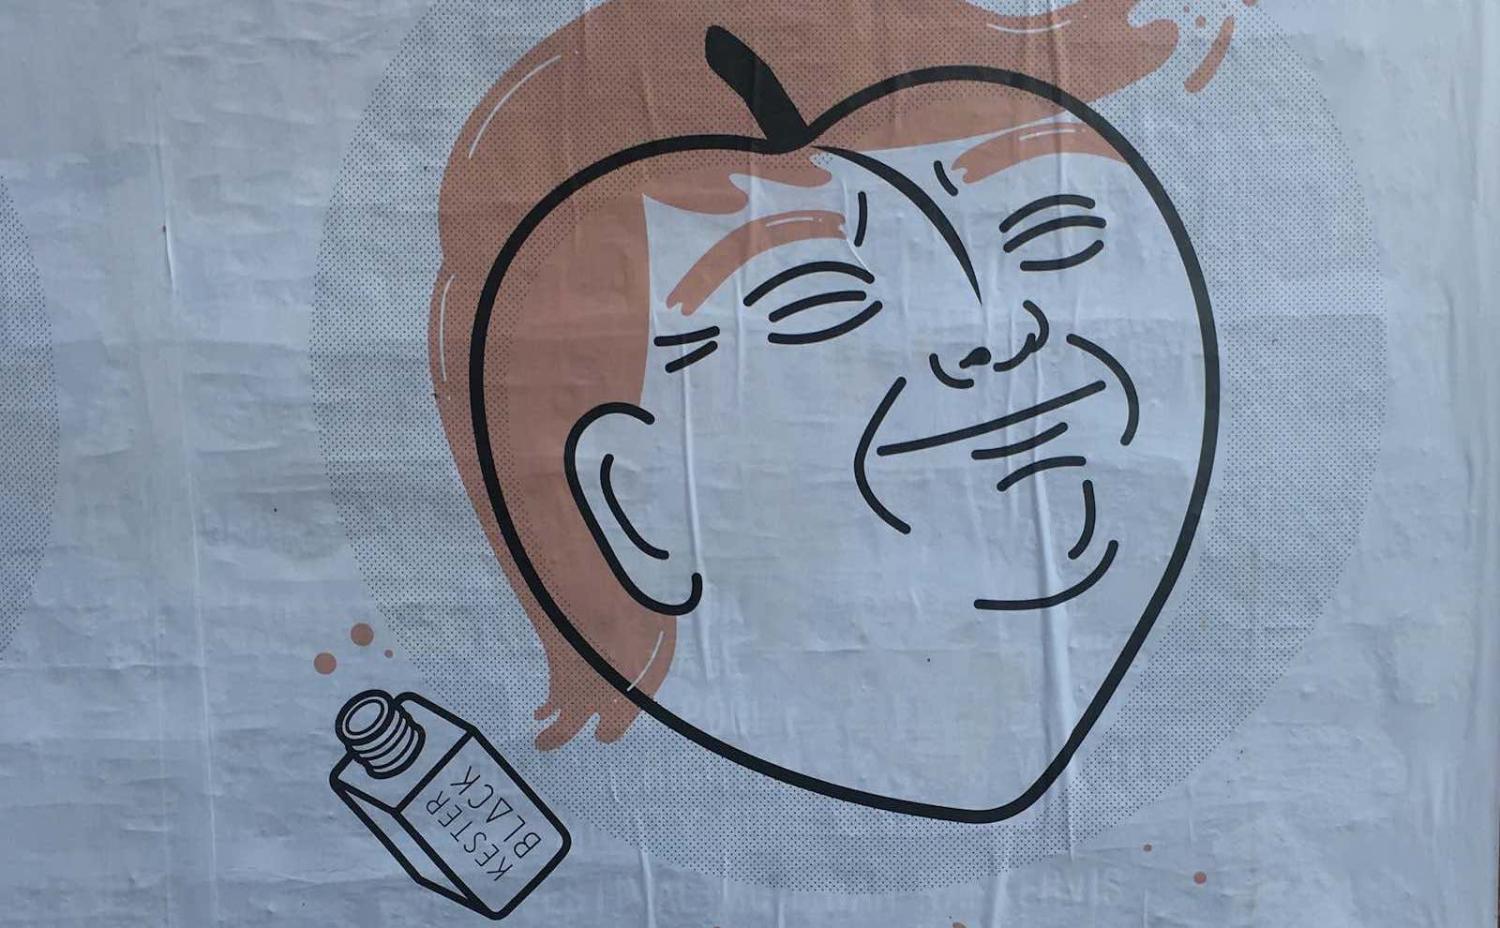 Donald Trump depicted on a wall in Melbourne, Australia (Photo: edwardhblake/Flickr)